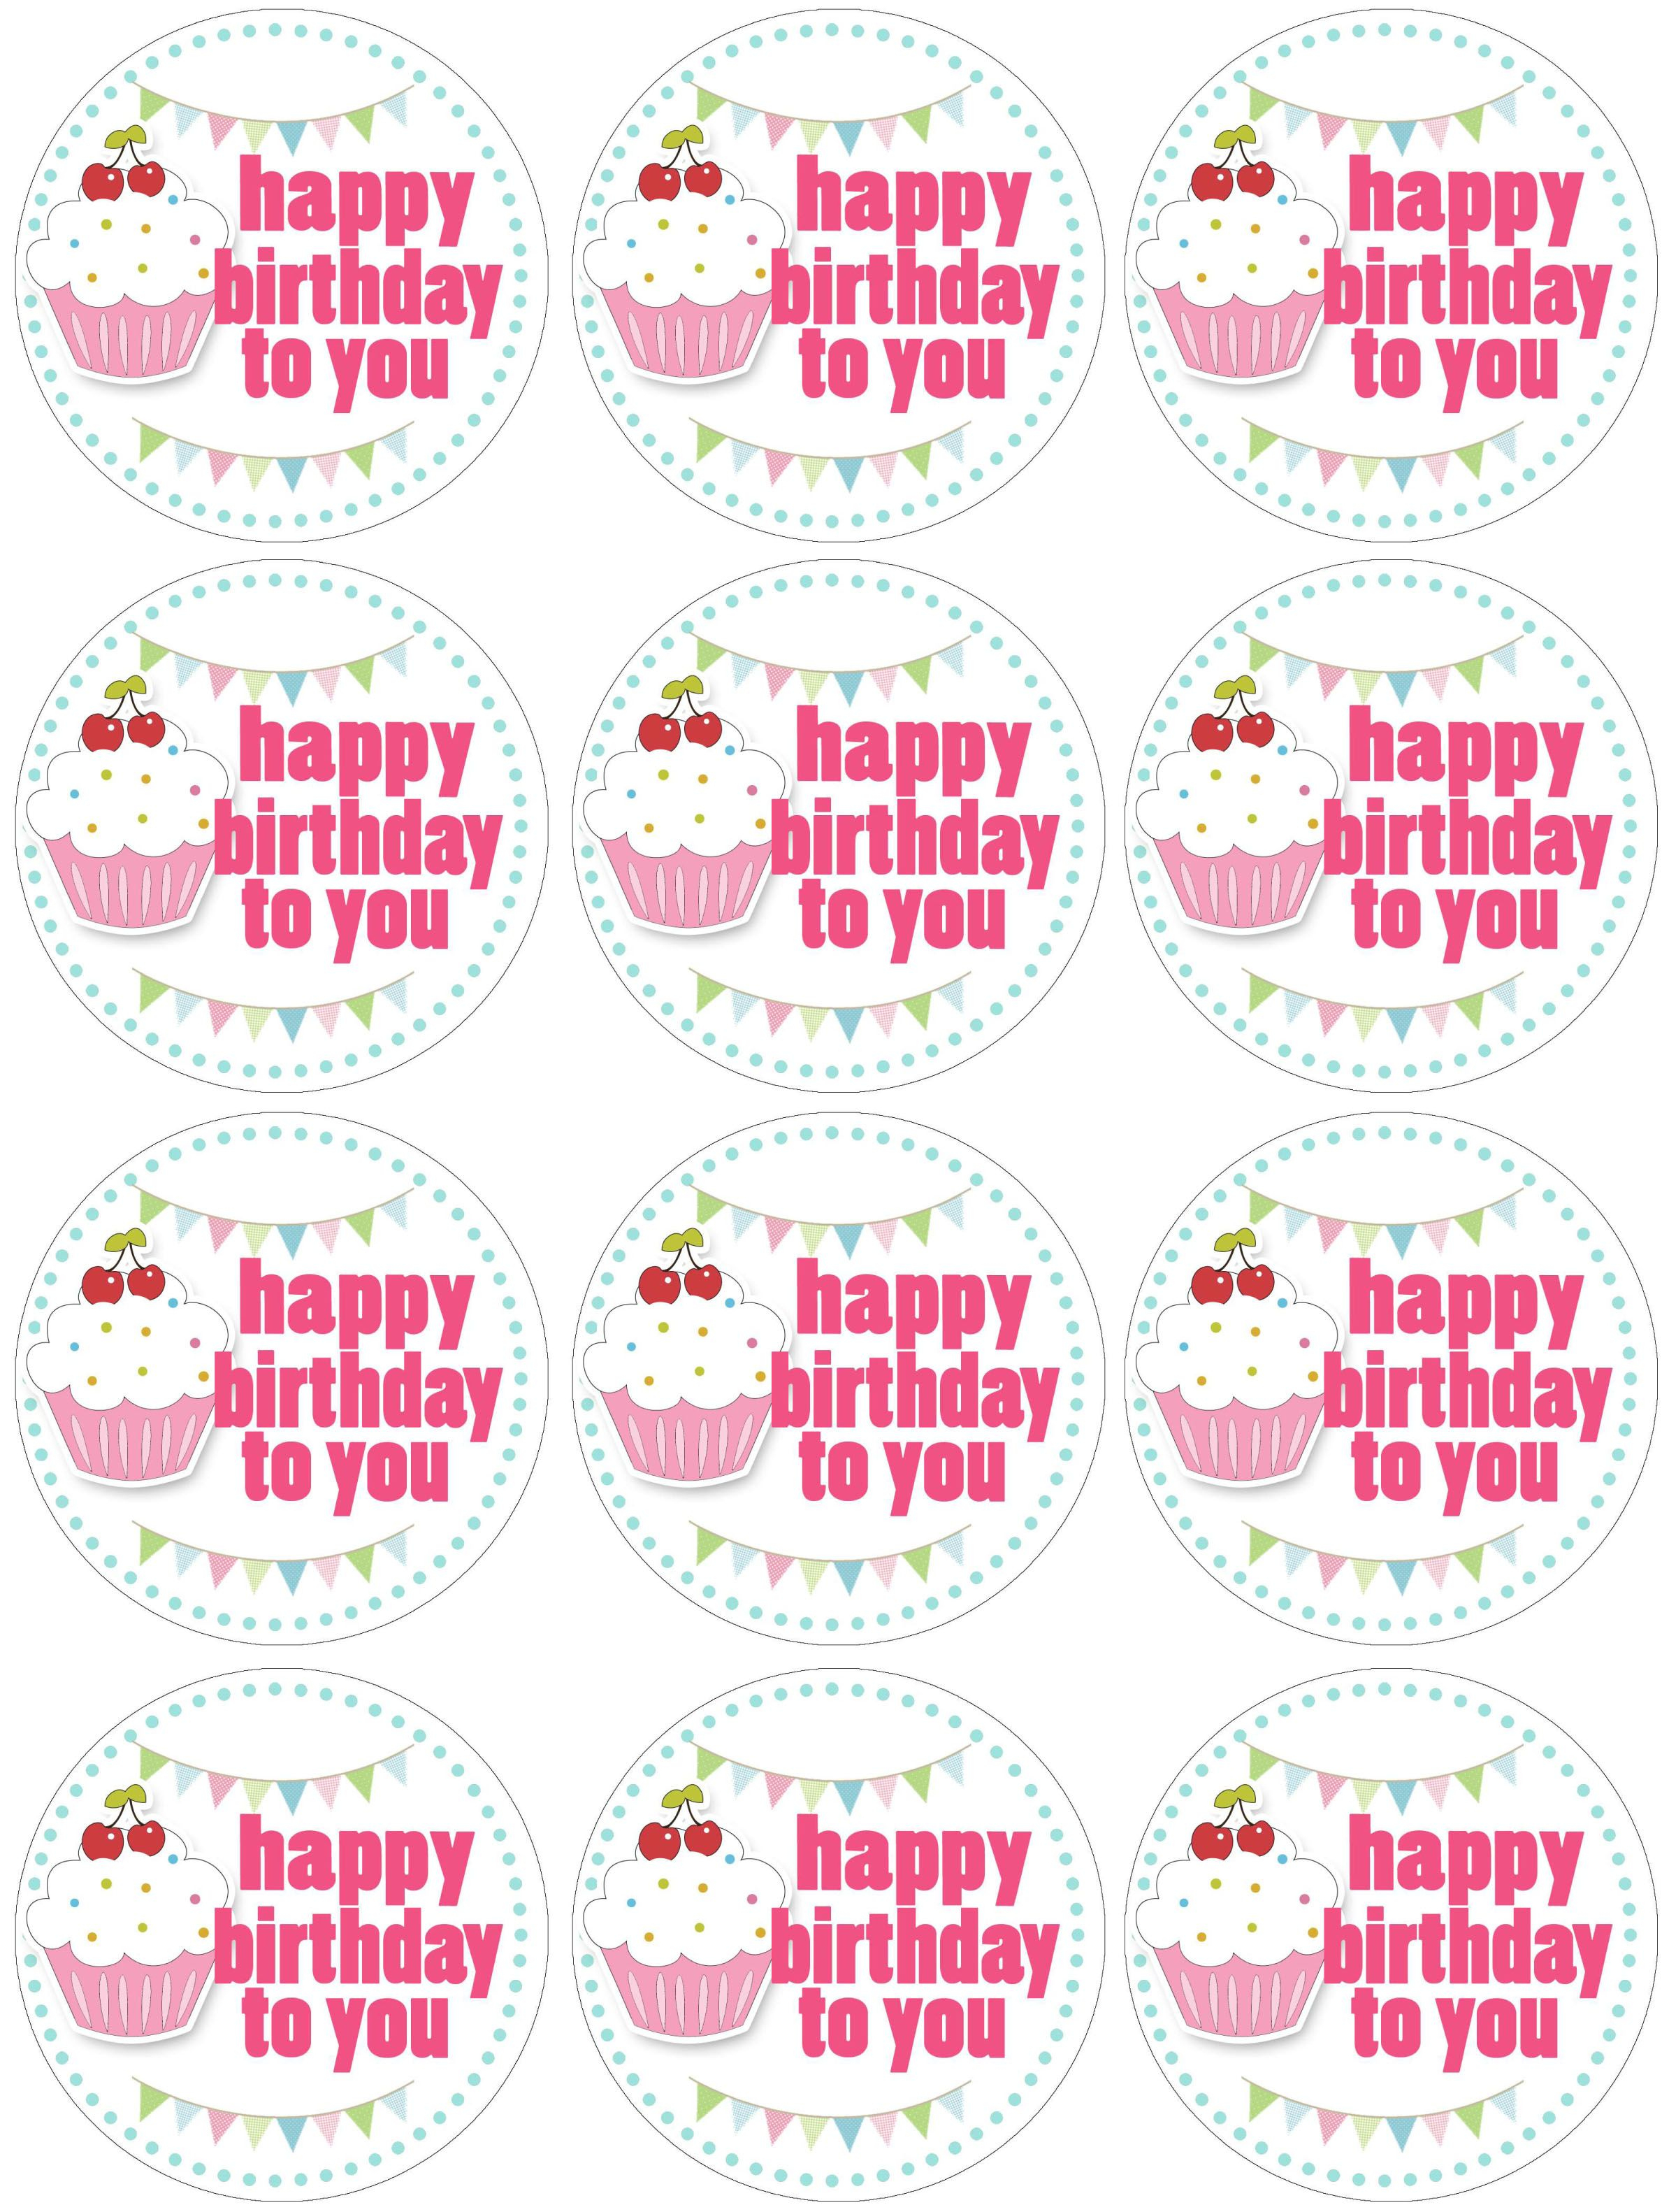 Cupcake Birthday Party With Free Printables | Free Printables - Free Printable Happy Birthday Cake Topper